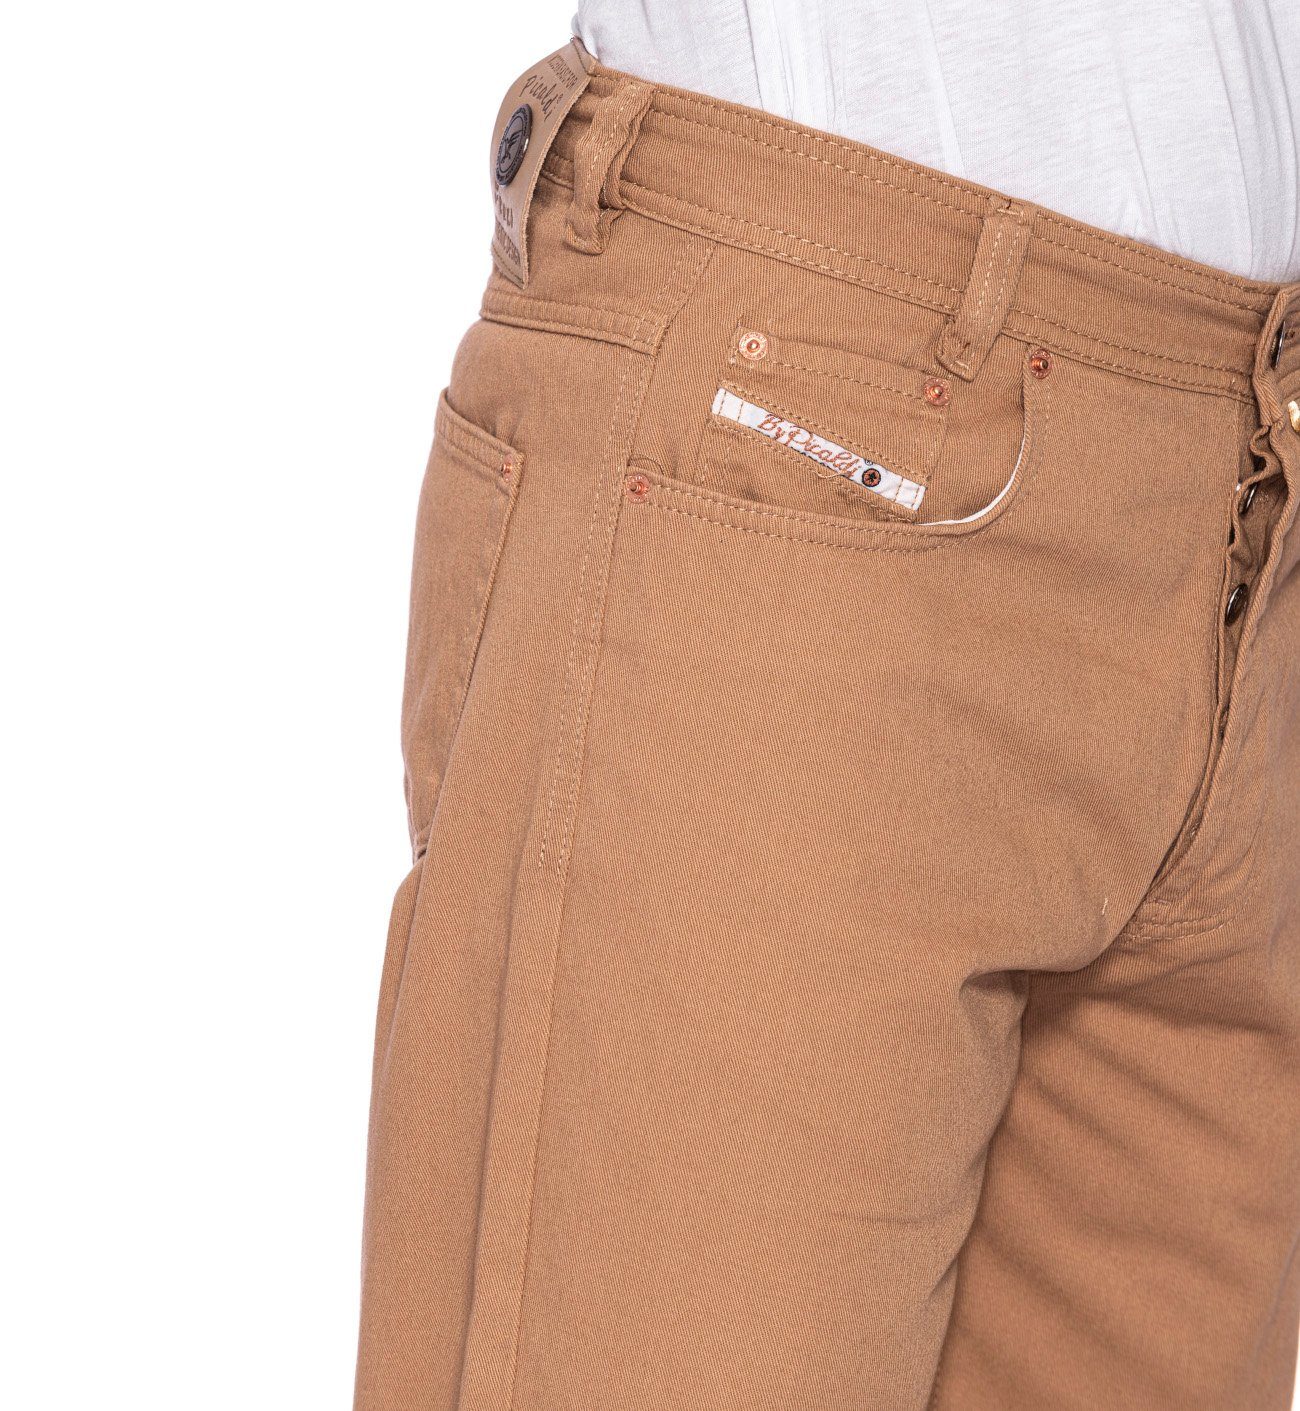 PICALDI Jeans Zicco Sommerhose, Tapered-fit-Jeans Loose Fit, Gabardine Relaxed Fit, Freizeithose 472 Camel